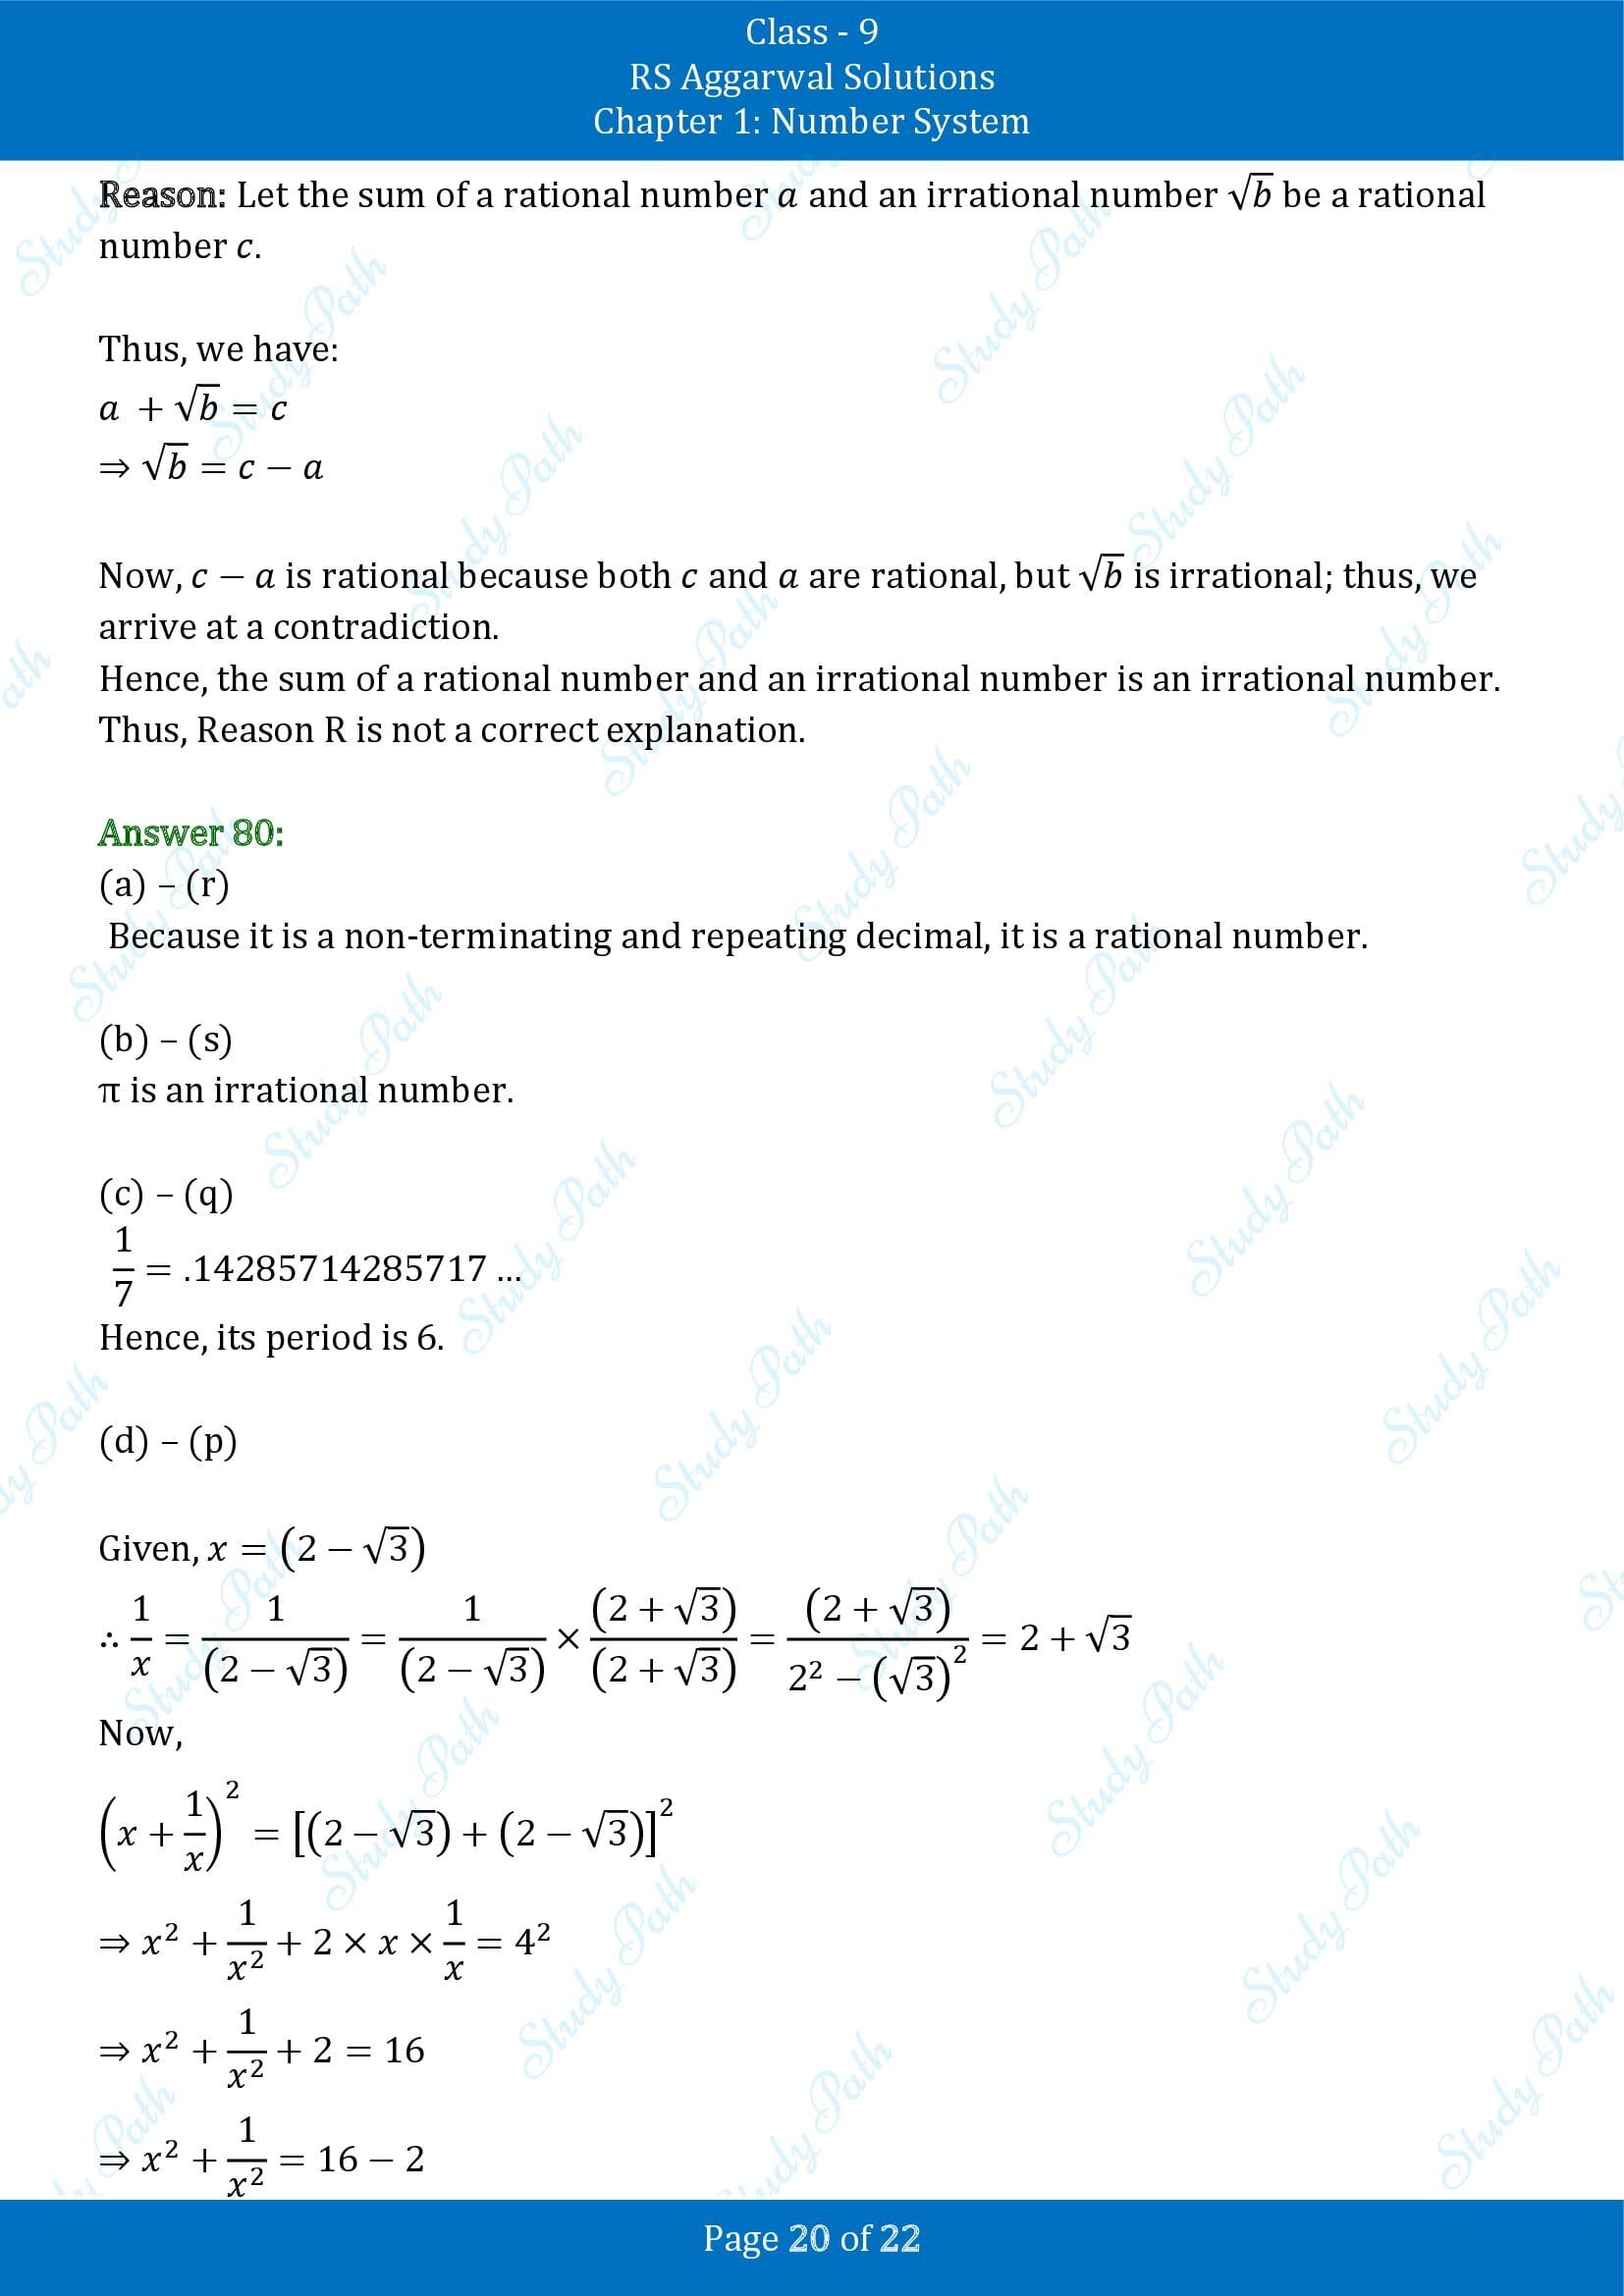 RS Aggarwal Solutions Class 9 Chapter 1 Number System Multiple Choice Questions MCQs 00020